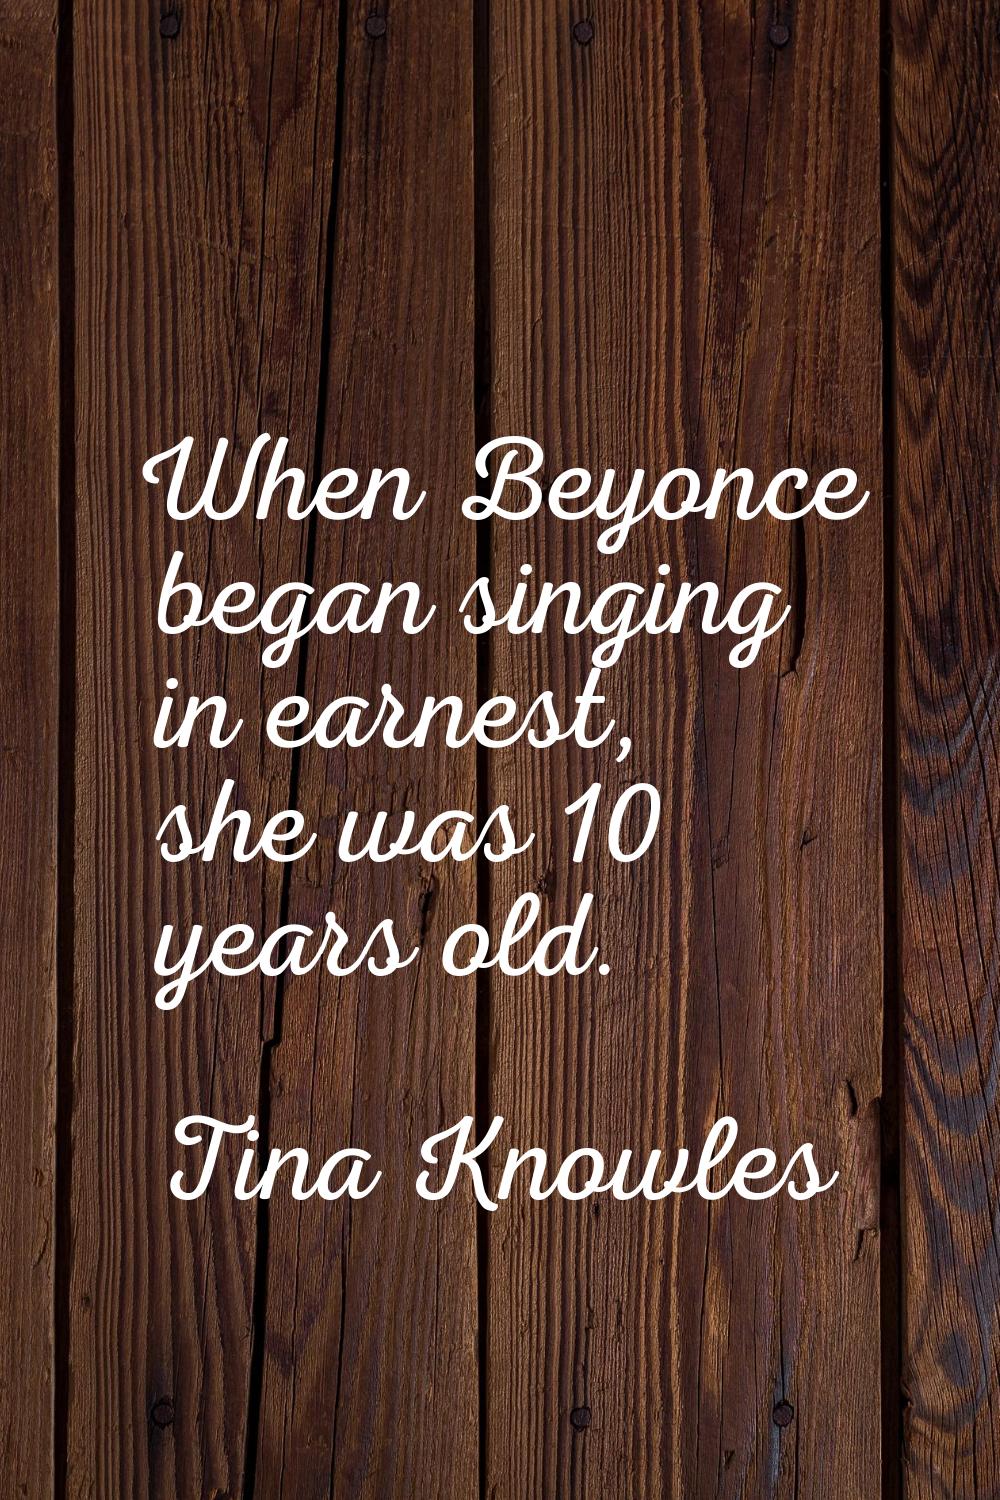 When Beyonce began singing in earnest, she was 10 years old.